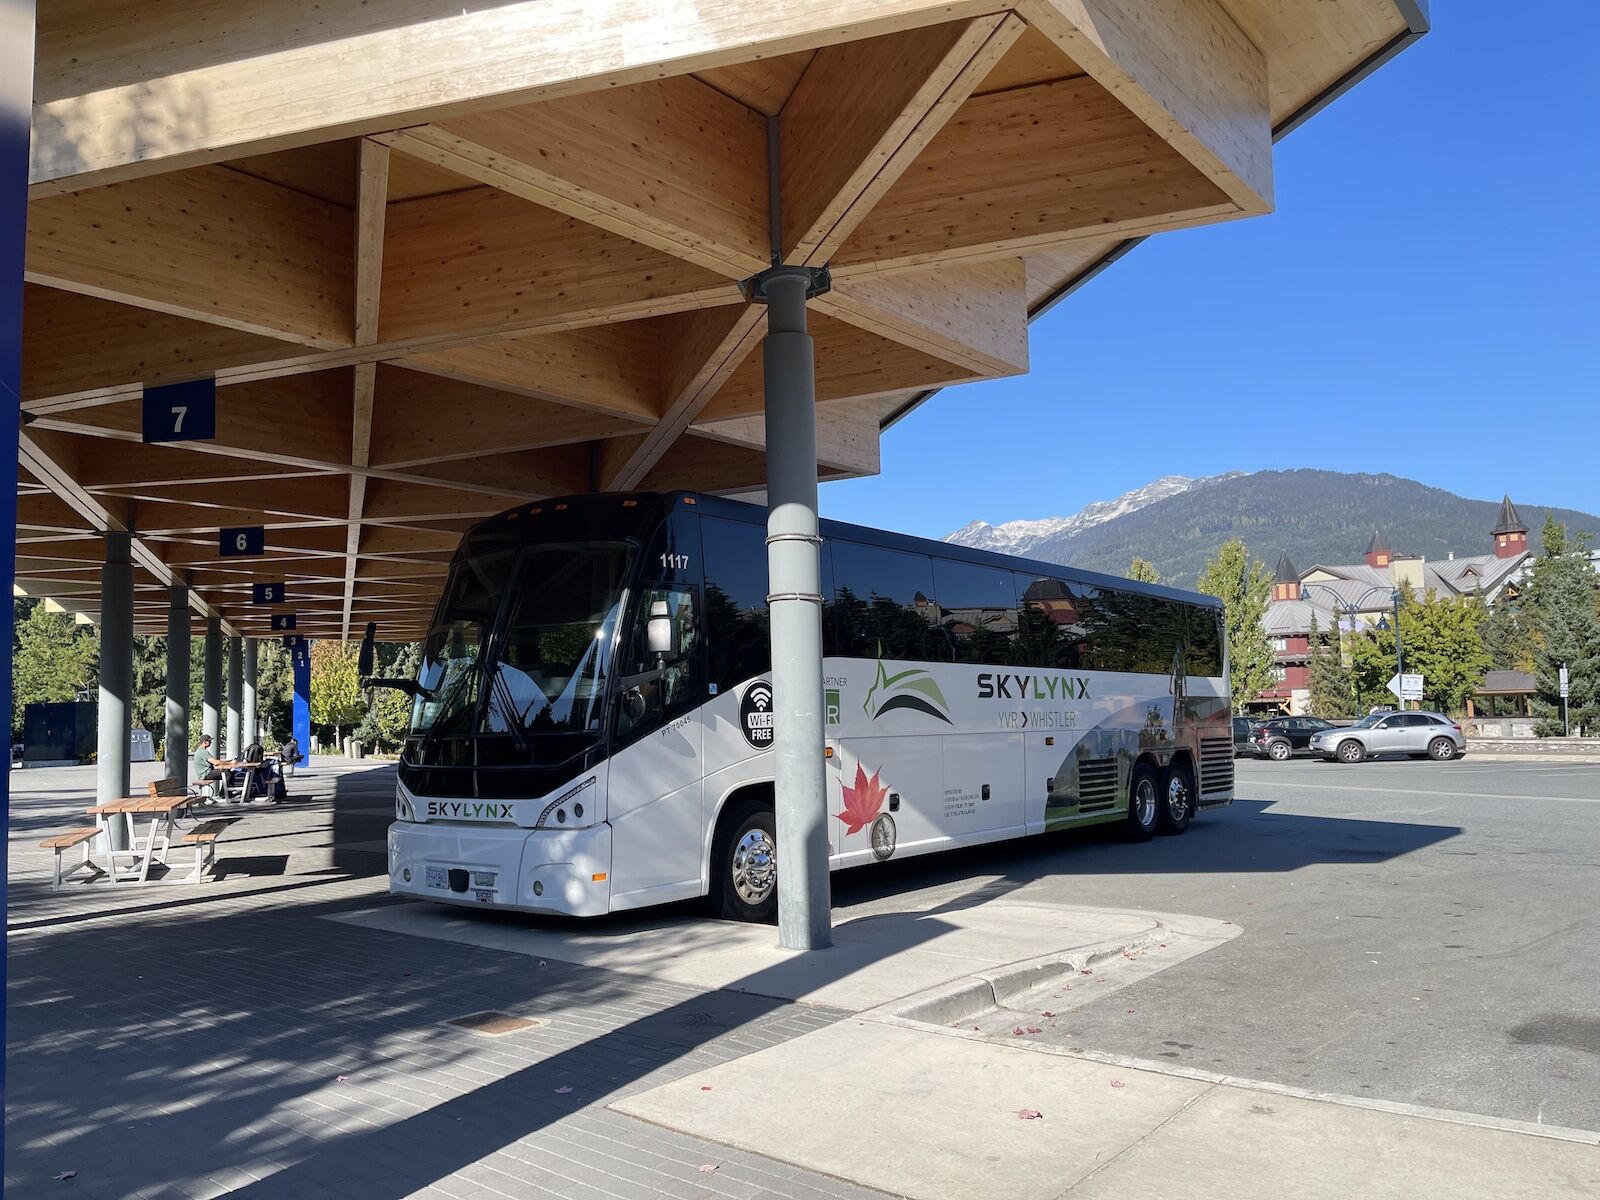 The Skylynx bus is one of the way to get to Whistler, Canada